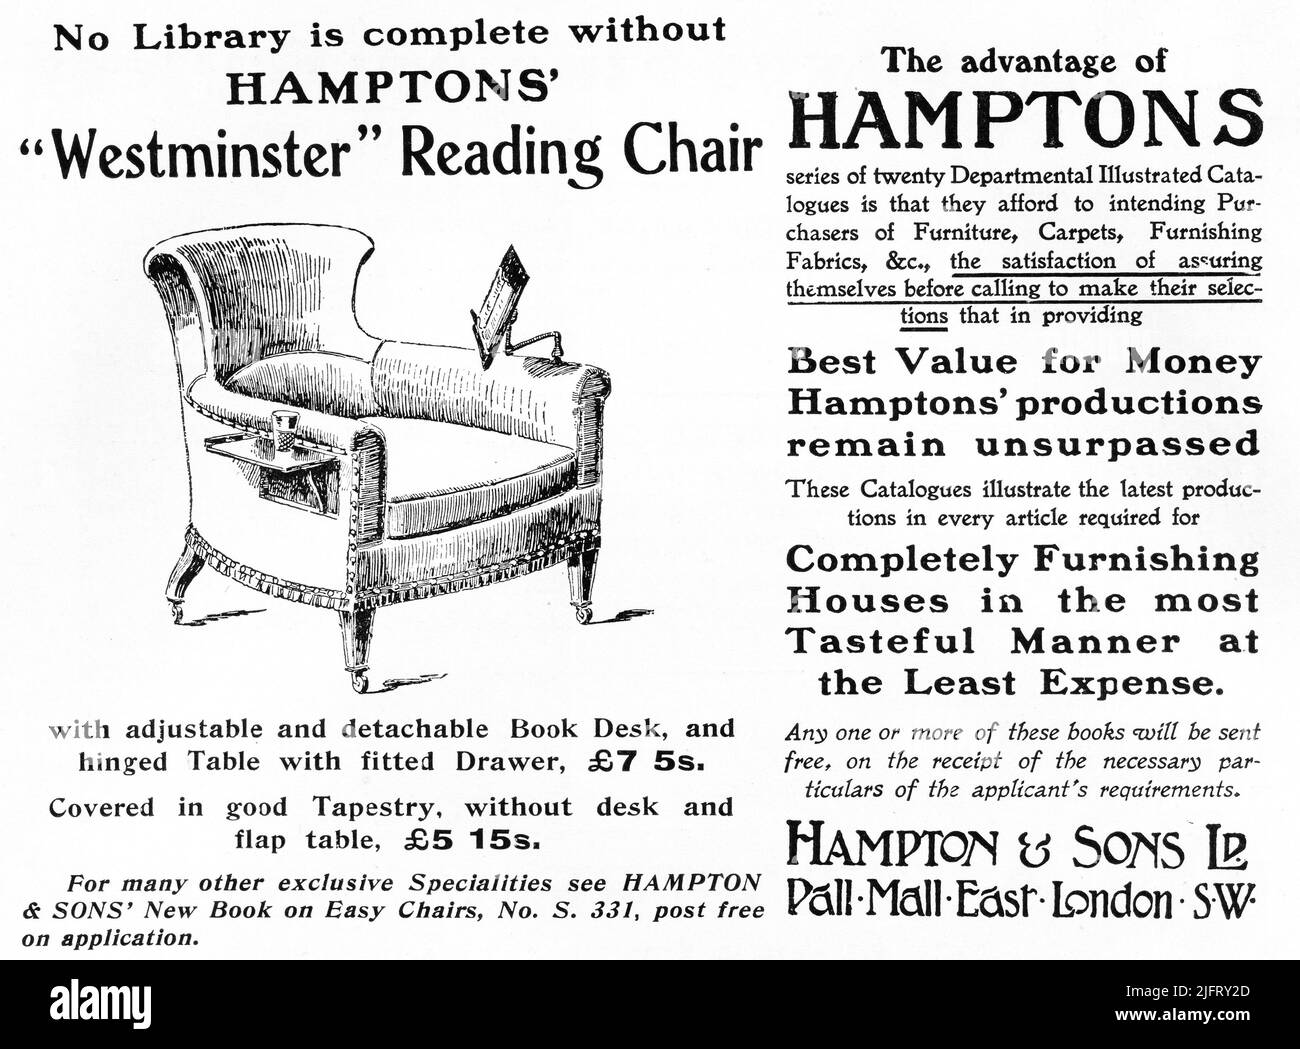 A 1903 advertisement by Hampton & Sons Ltd., Pall Mall East, London. S.W.  promoting their ‘Westminster’ reading chair. “Completely furnishing houses in the most tasteful manner at the least expense”. Stock Photo